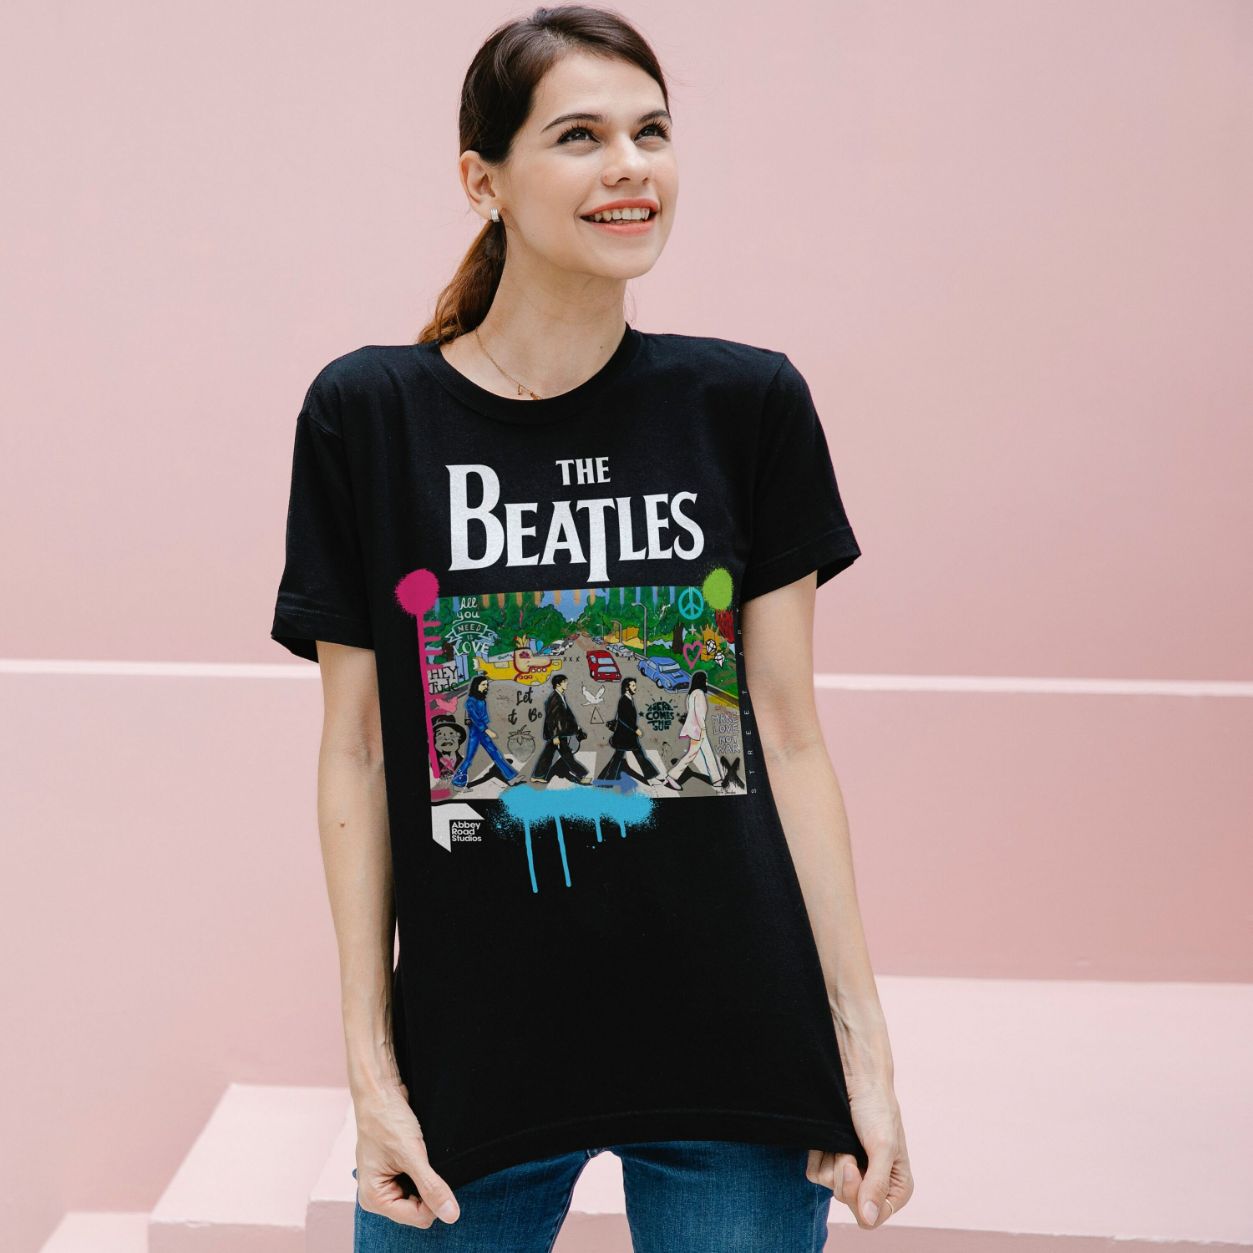 The Beatles Crossing Abbey Road Unisex Shirt